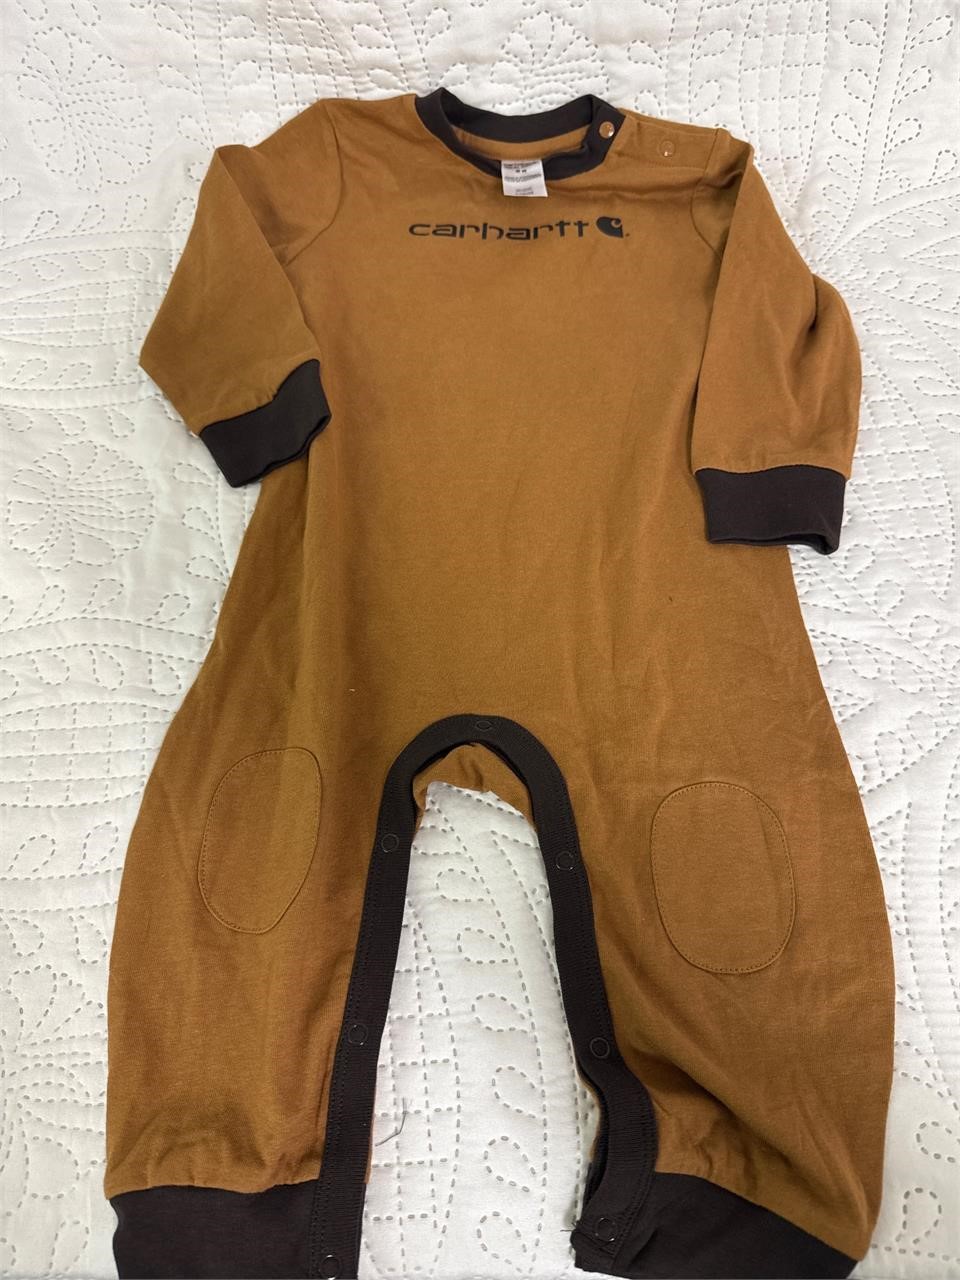 Cathartic Onsie size 9mo